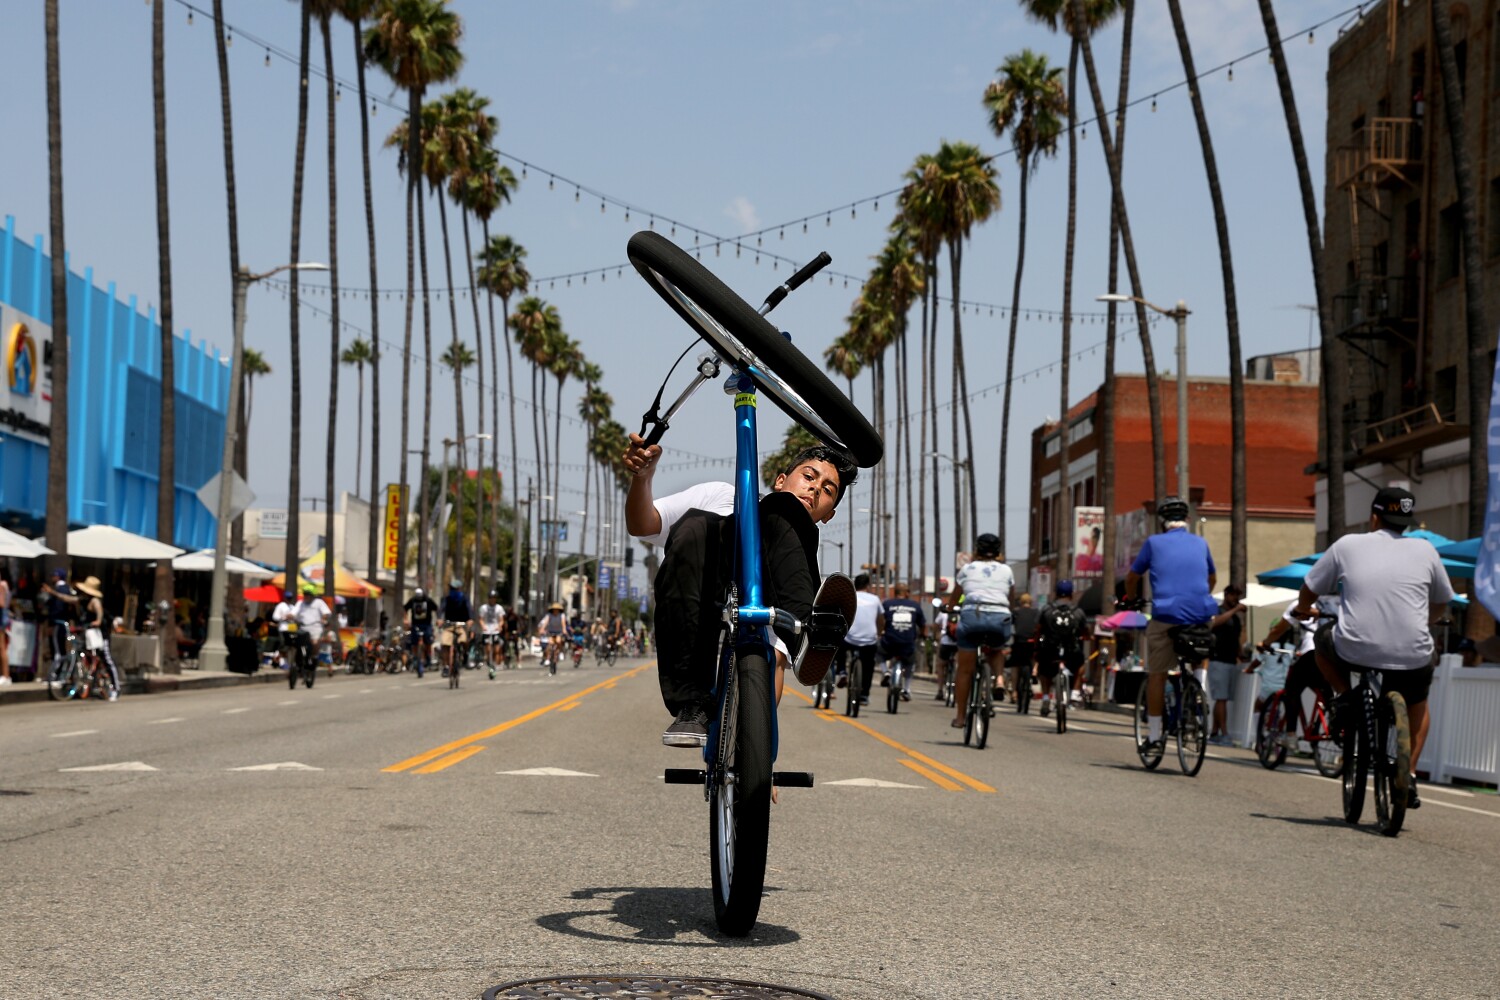 7 L.A. cyclists share how to go car-free, ride safely and have fun